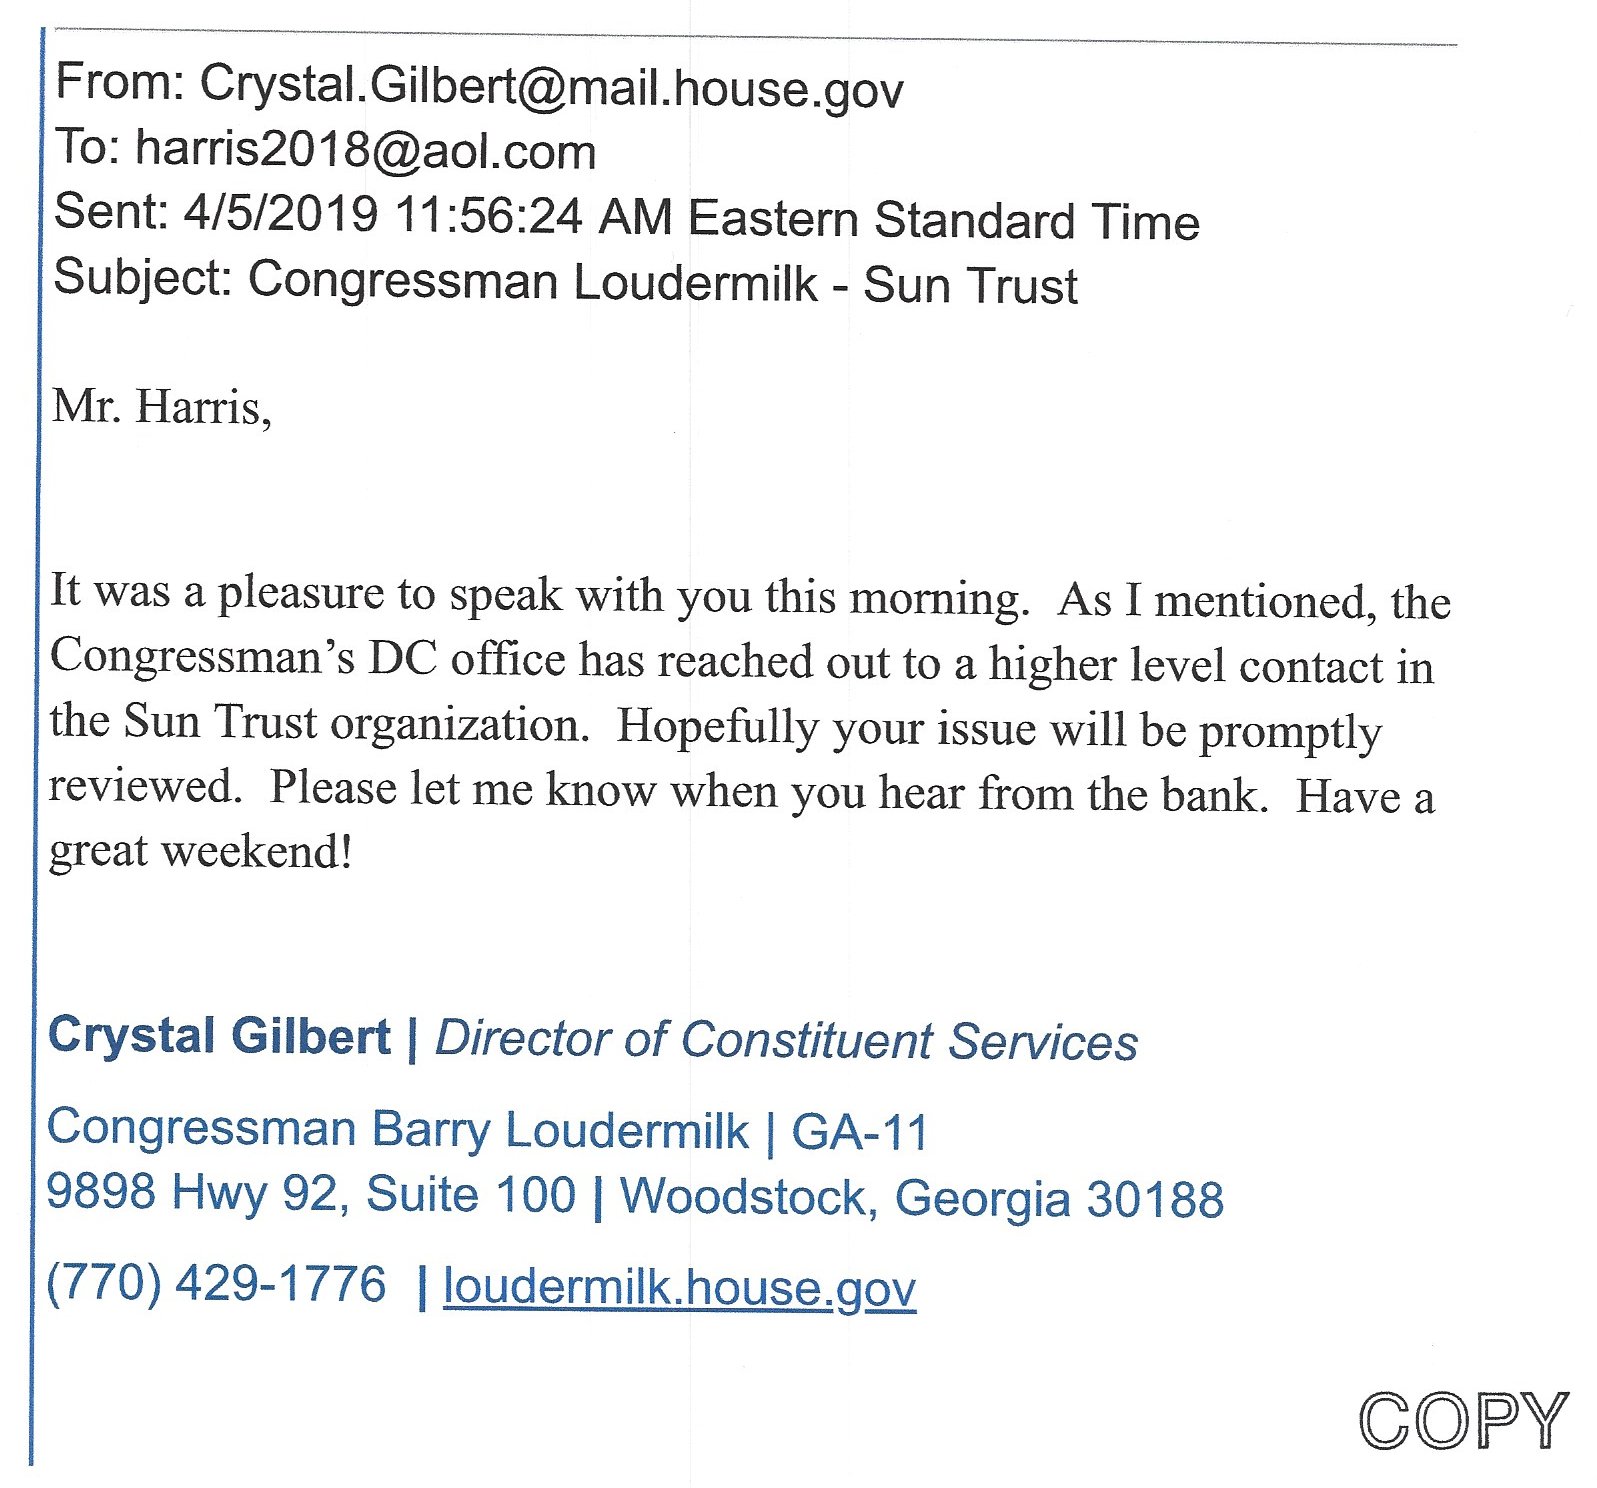 Incoming from Congressman Loudermilk's office.